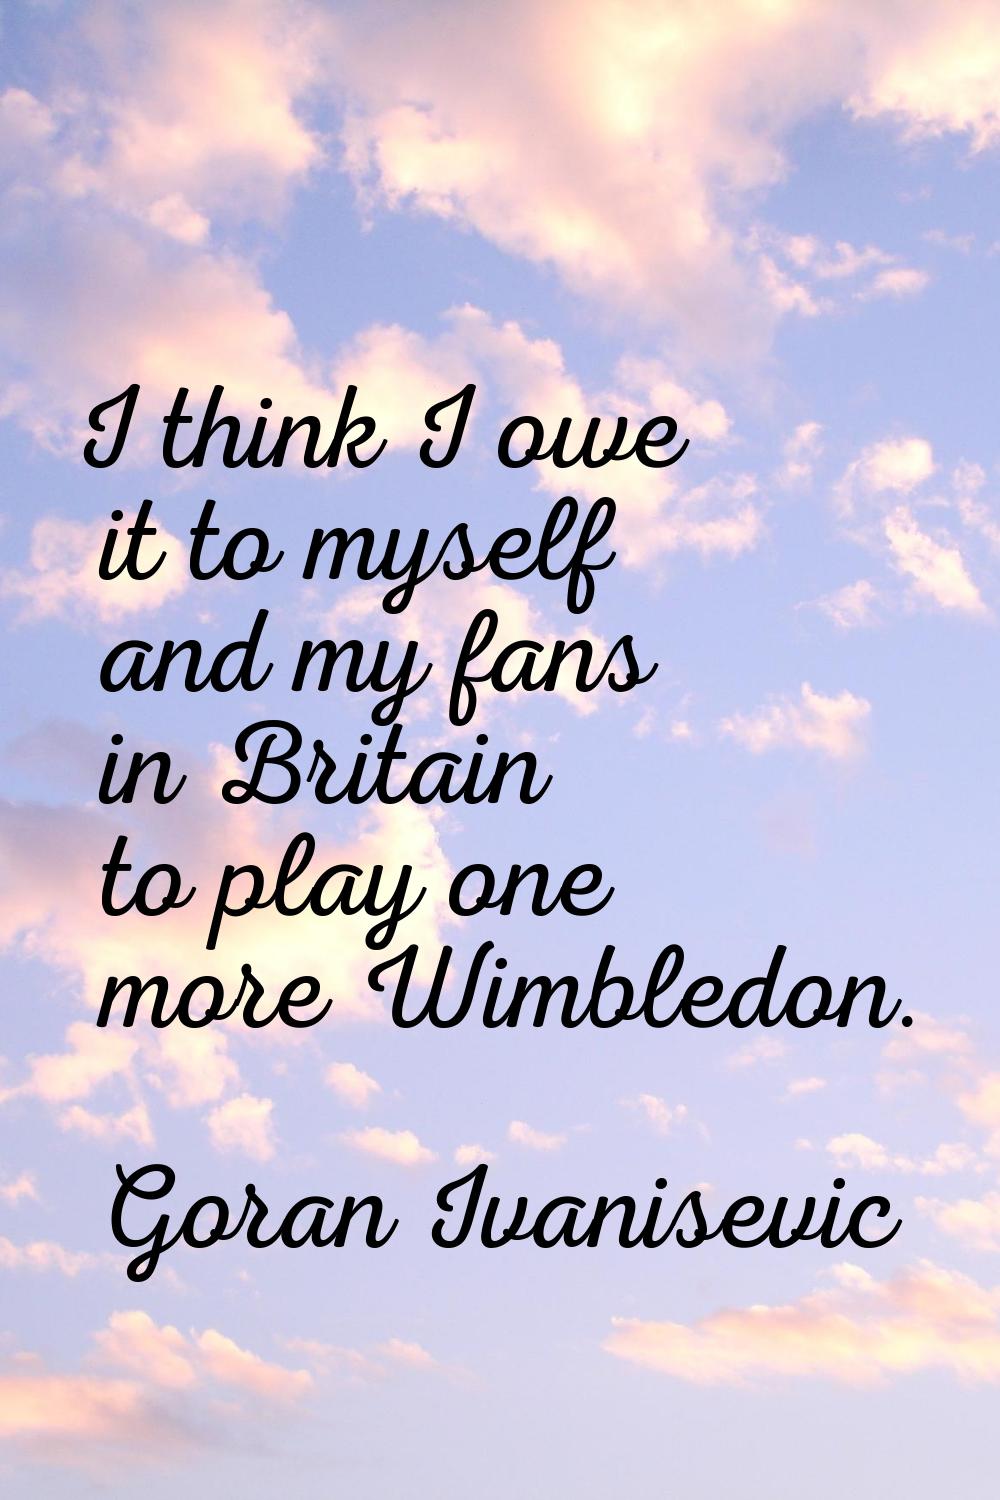 I think I owe it to myself and my fans in Britain to play one more Wimbledon.